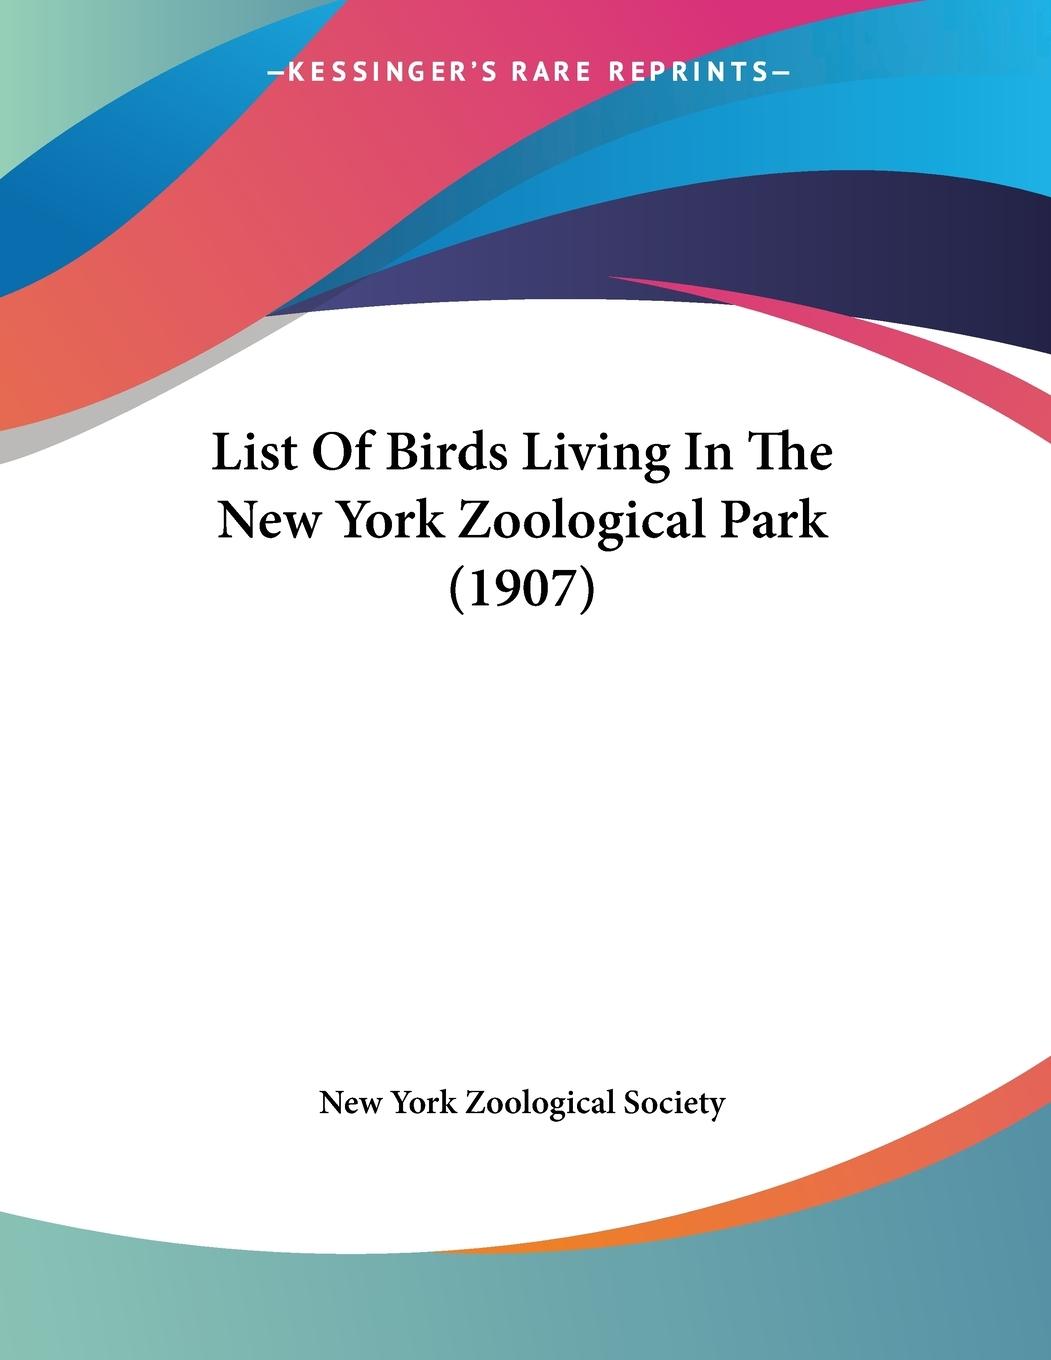 List Of Birds Living In The New York Zoological Park (1907) - New York Zoological Society